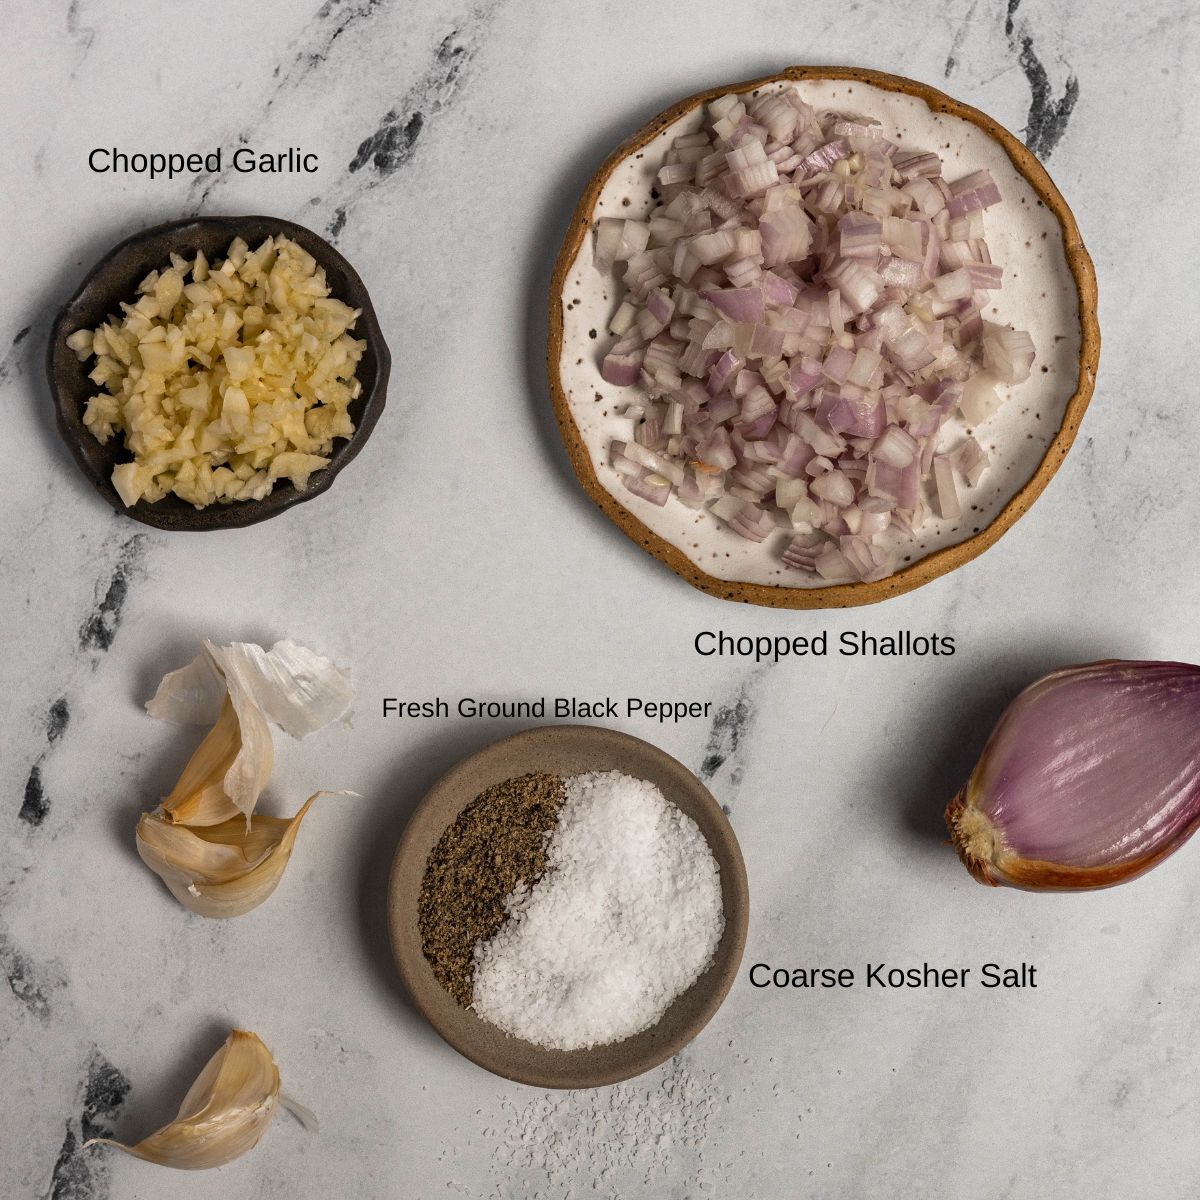 Ingredient image for Pumpkin and Mushroom Risotto. Shows chopped shallots, chopped garlic, salt, and pepper